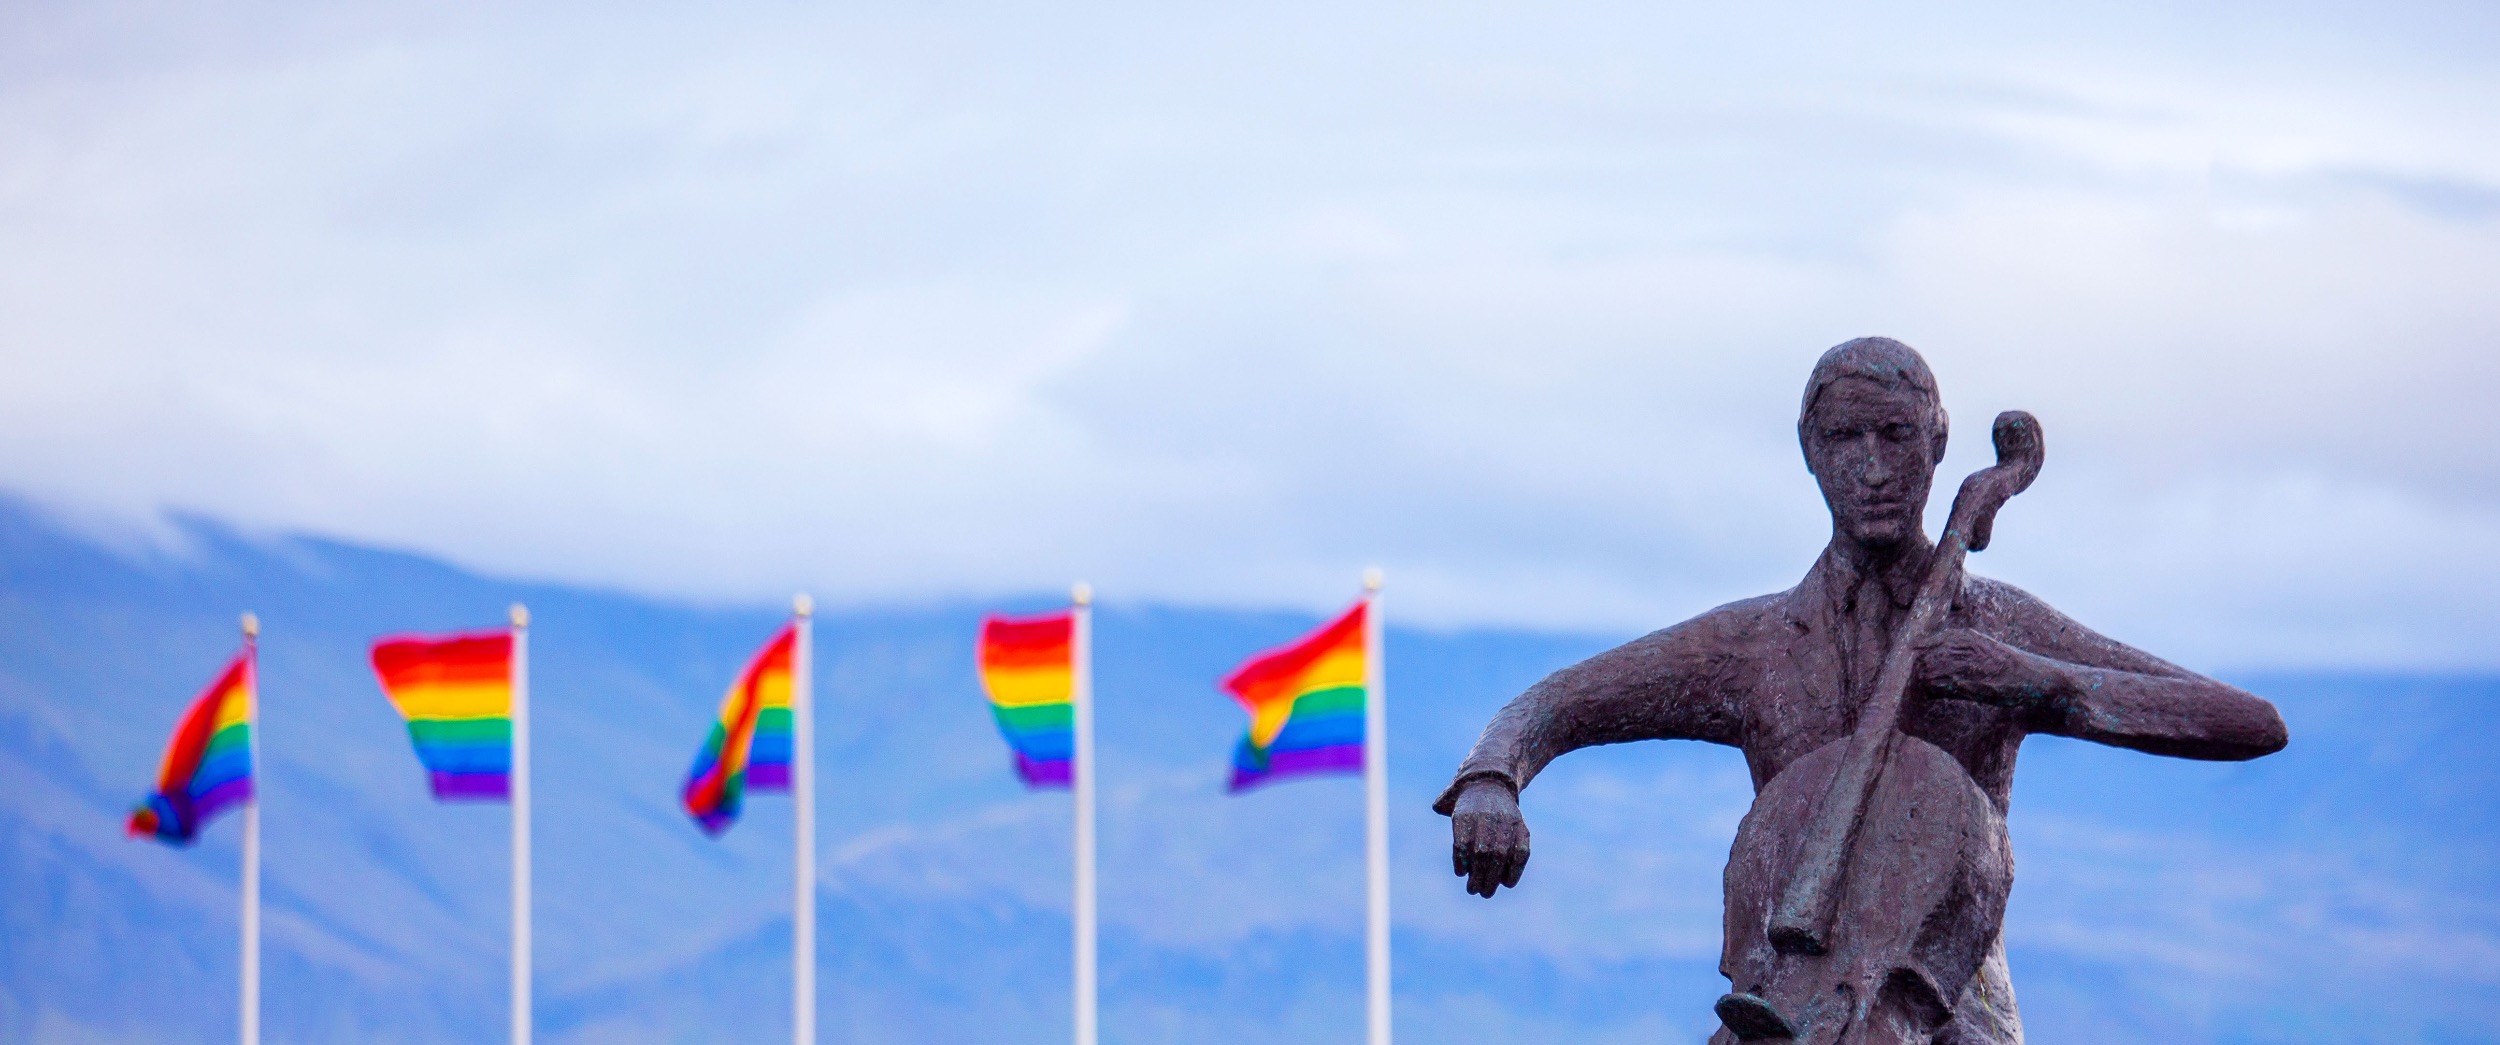 pride flags behind statue of a cellist